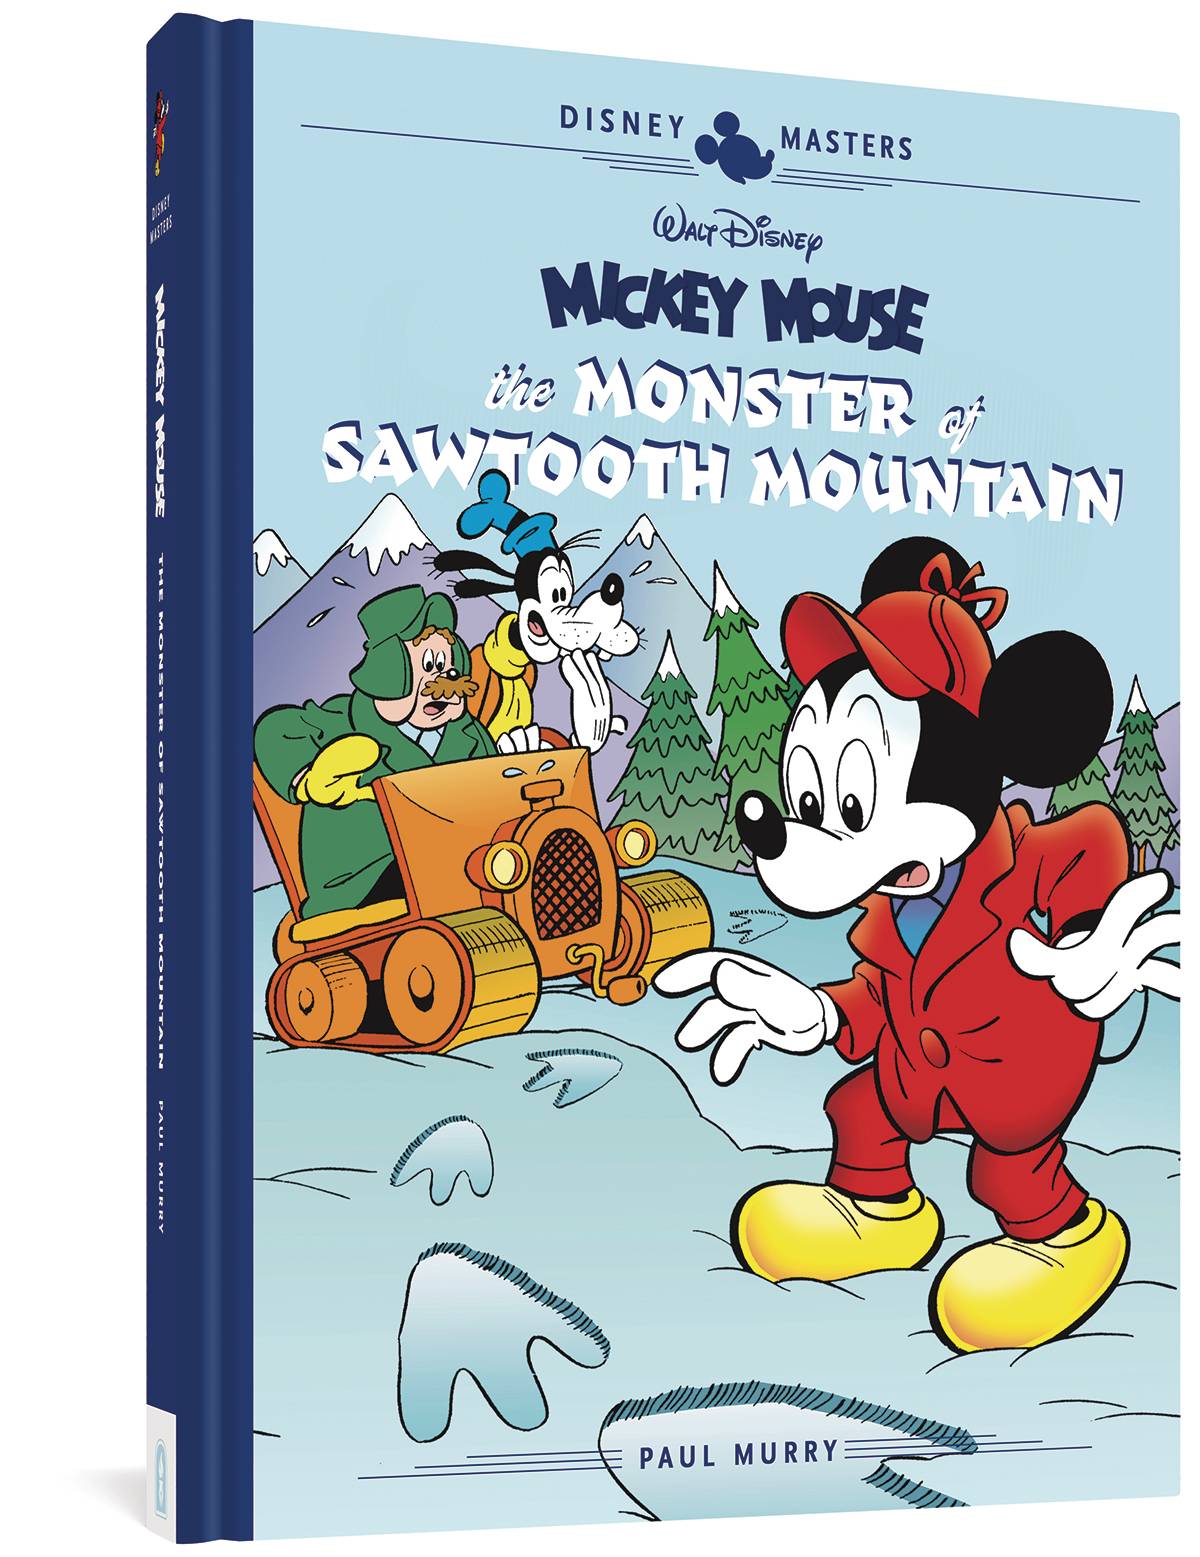 MICKEY MOUSE MONSTER OF SAWTOOTH MOUNTAIN HC